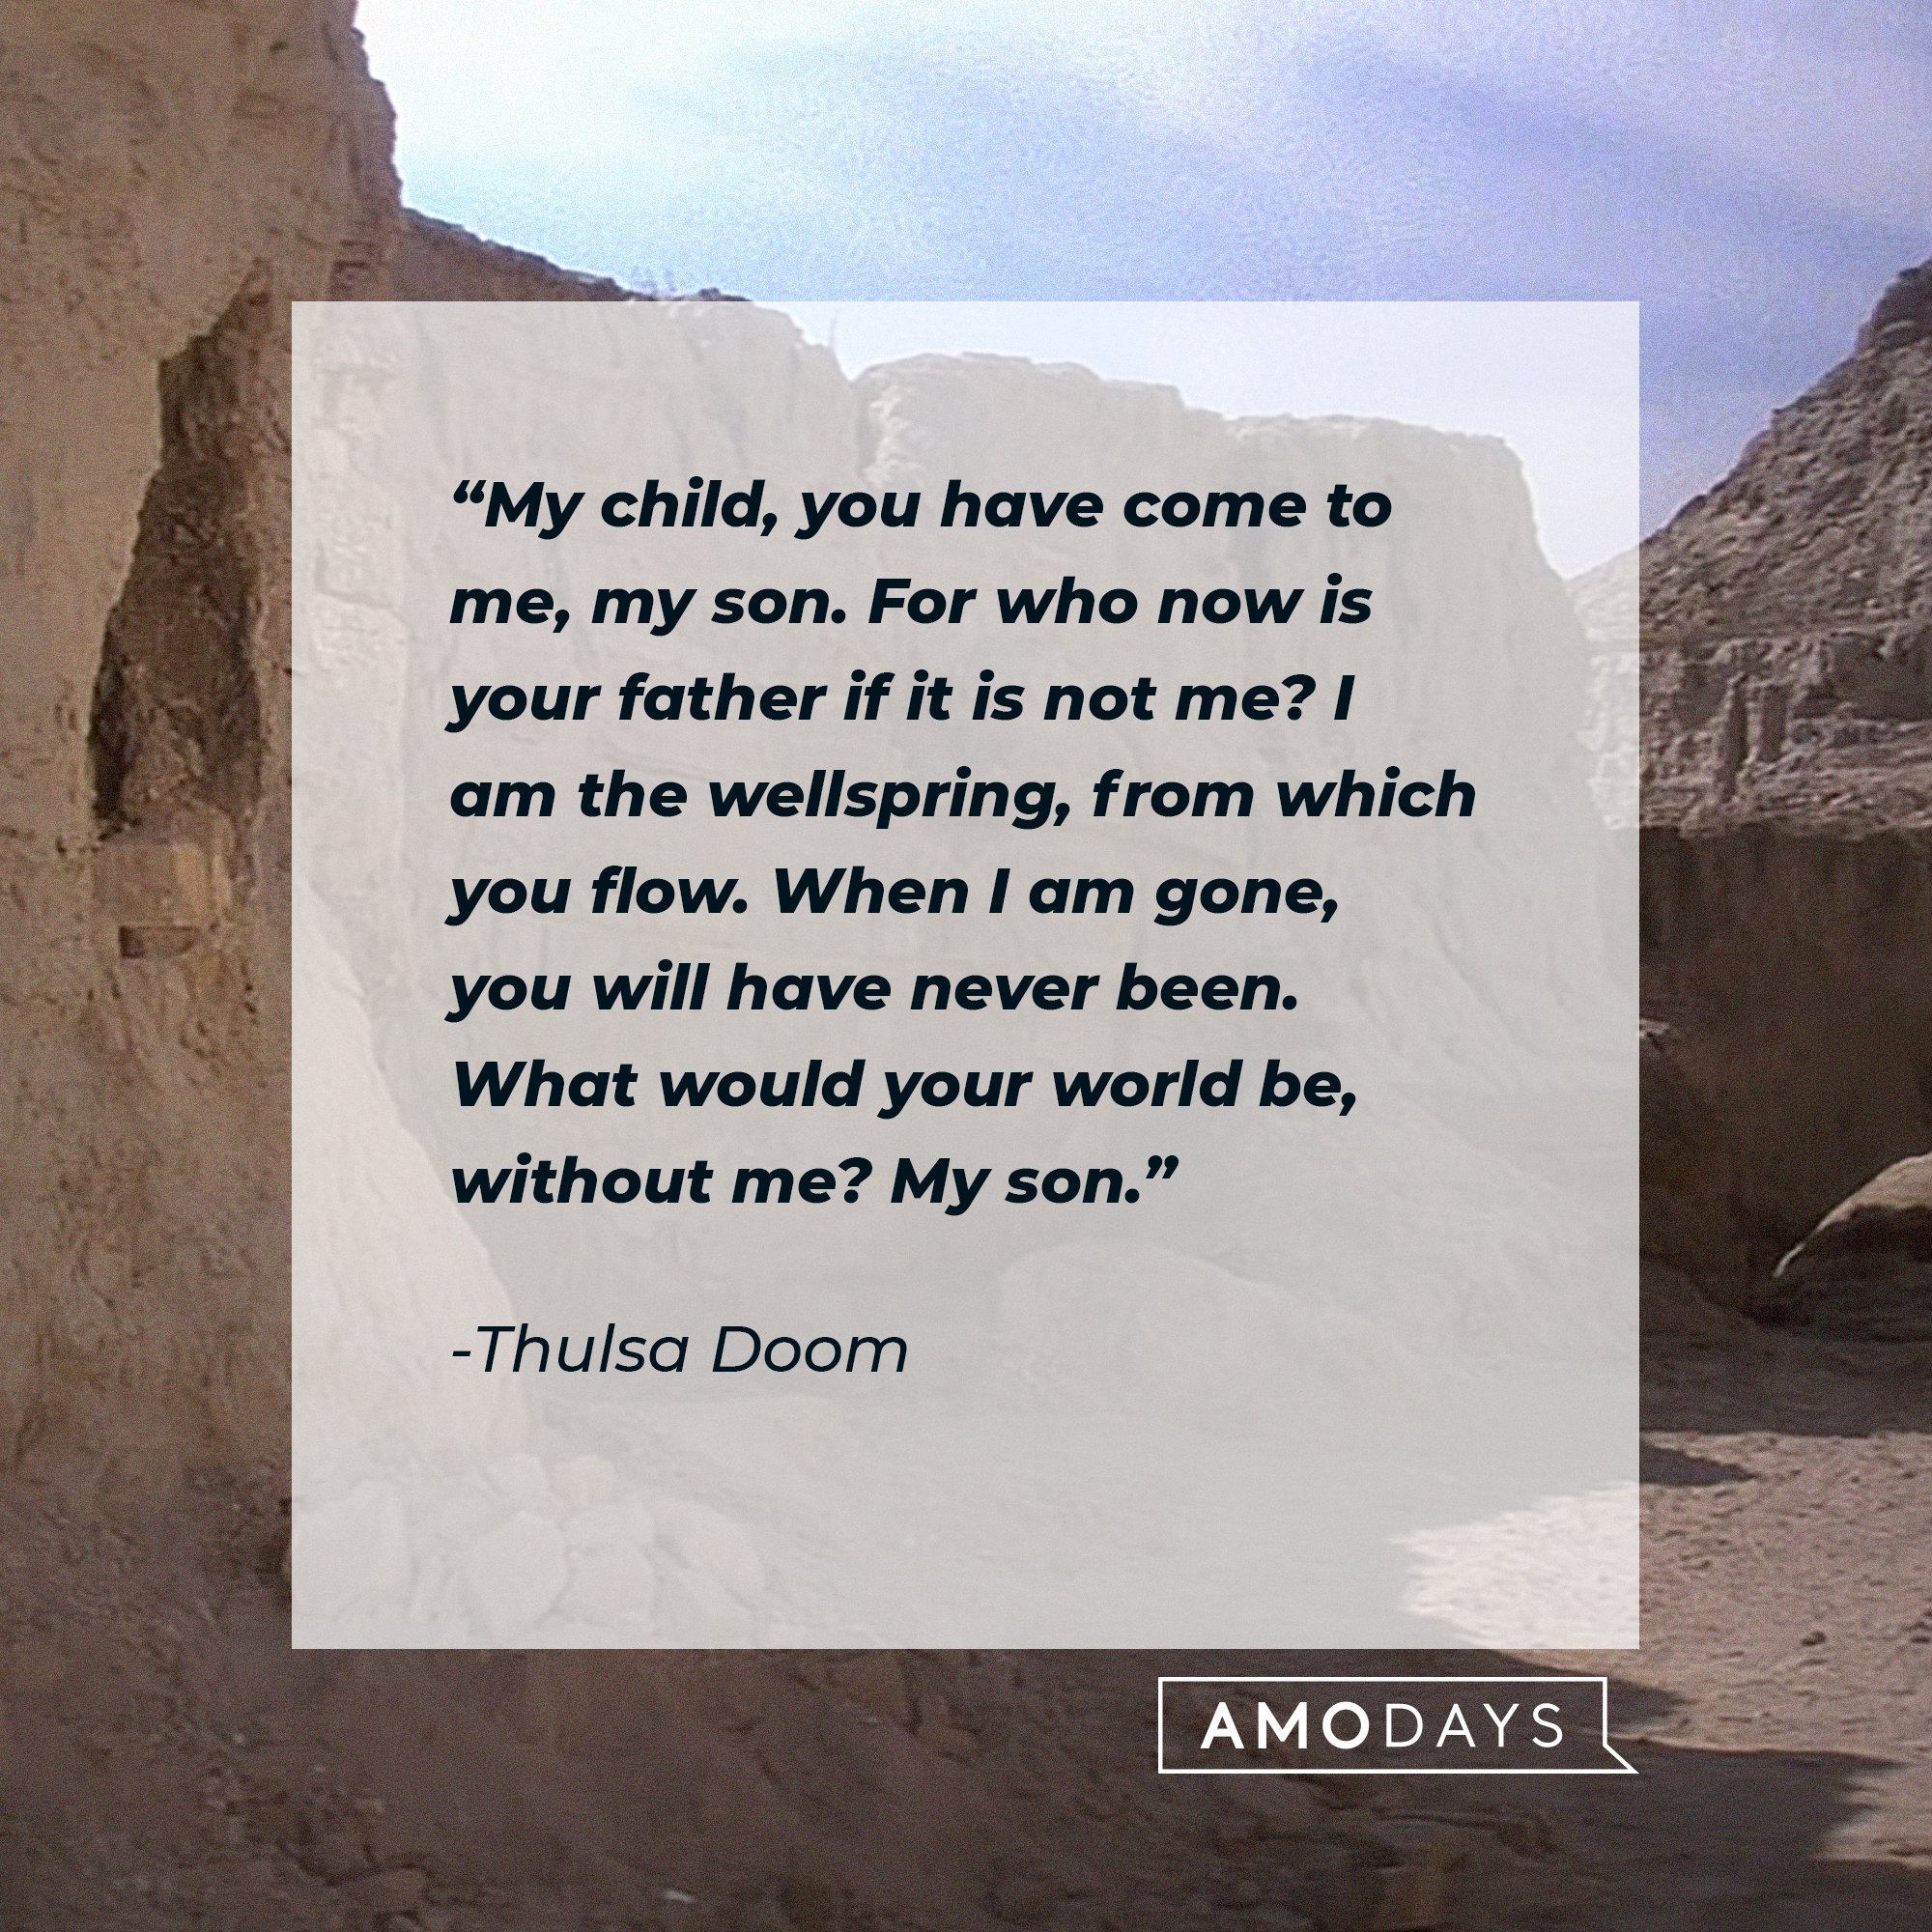 Thulsa Doom's quote: “My child, you have come to me, my son. For who now is your father if it is not me? I am the wellspring, from which you flow. When I am gone, you will have never been. What would your world be, without me? My son.” | Image: Amodays